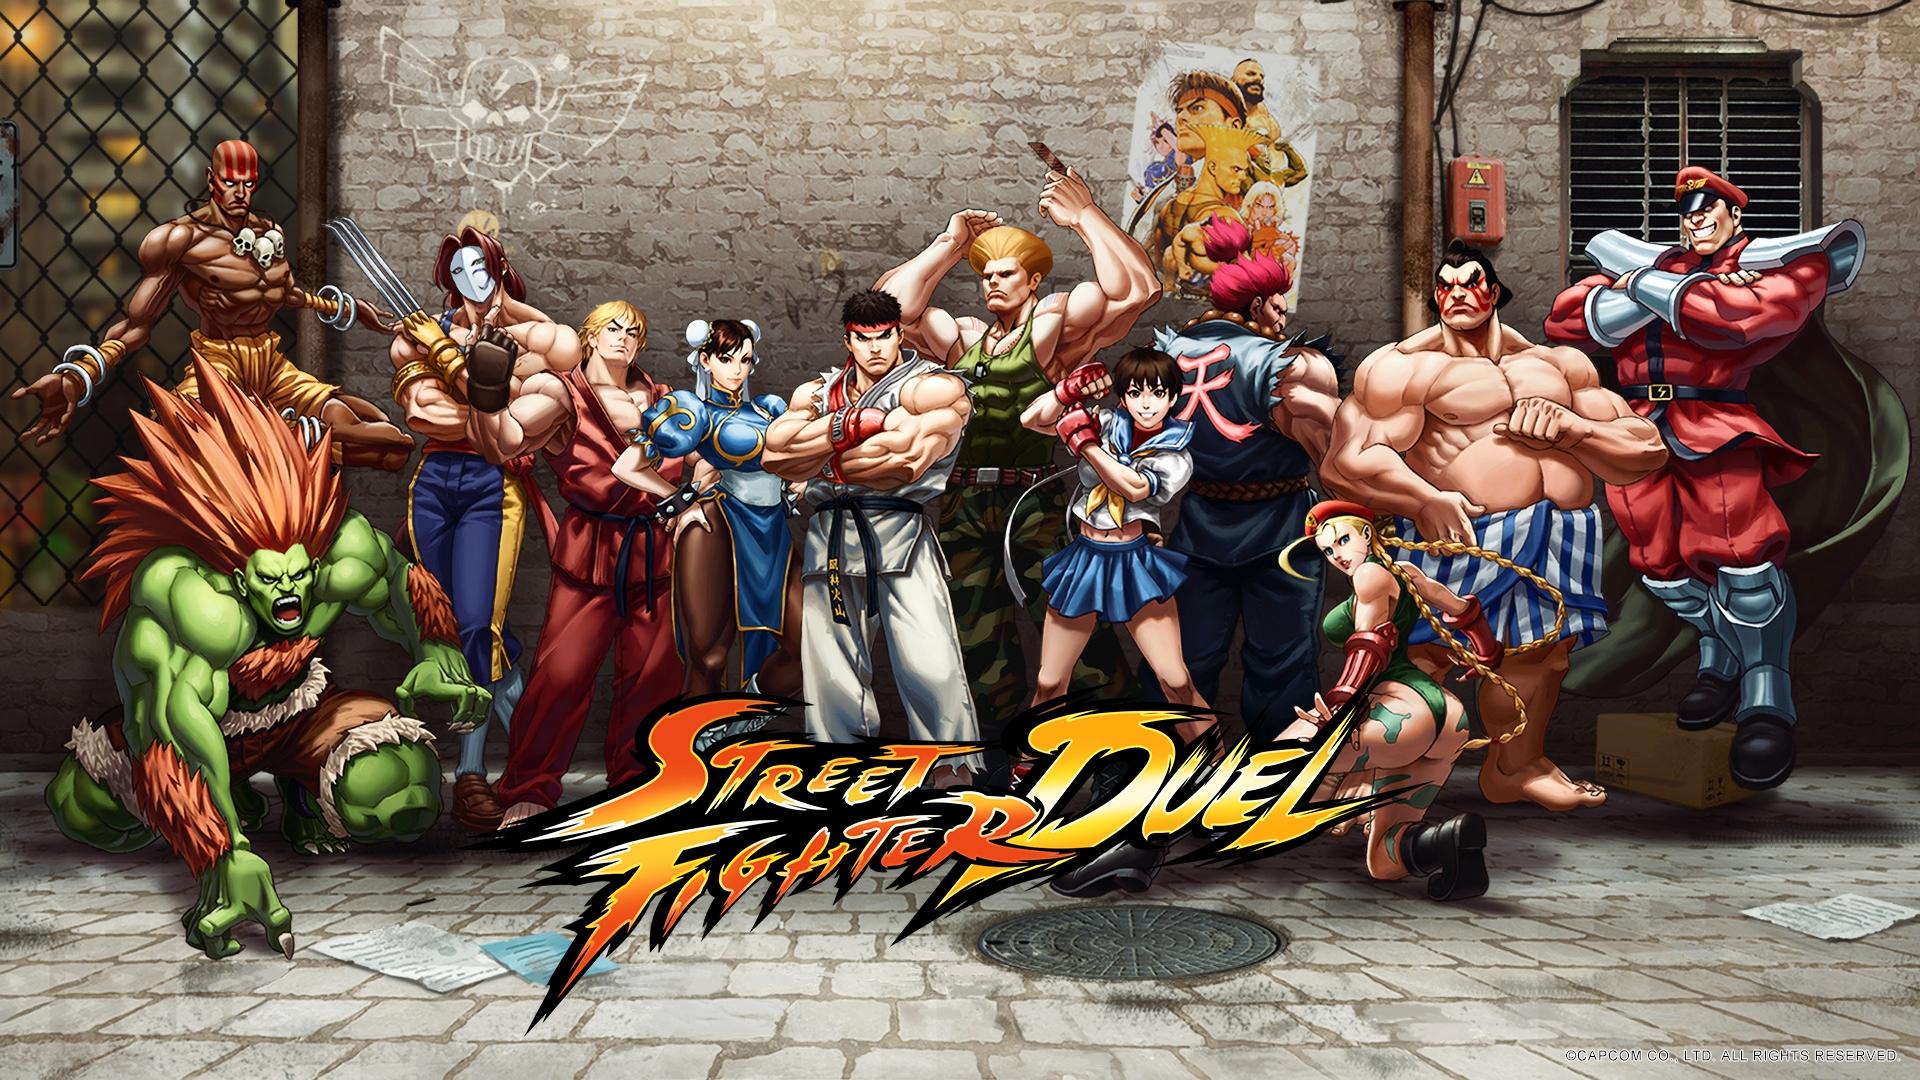 Athlete Chun-Li and Summer Yang Come to Street Fighter Duel